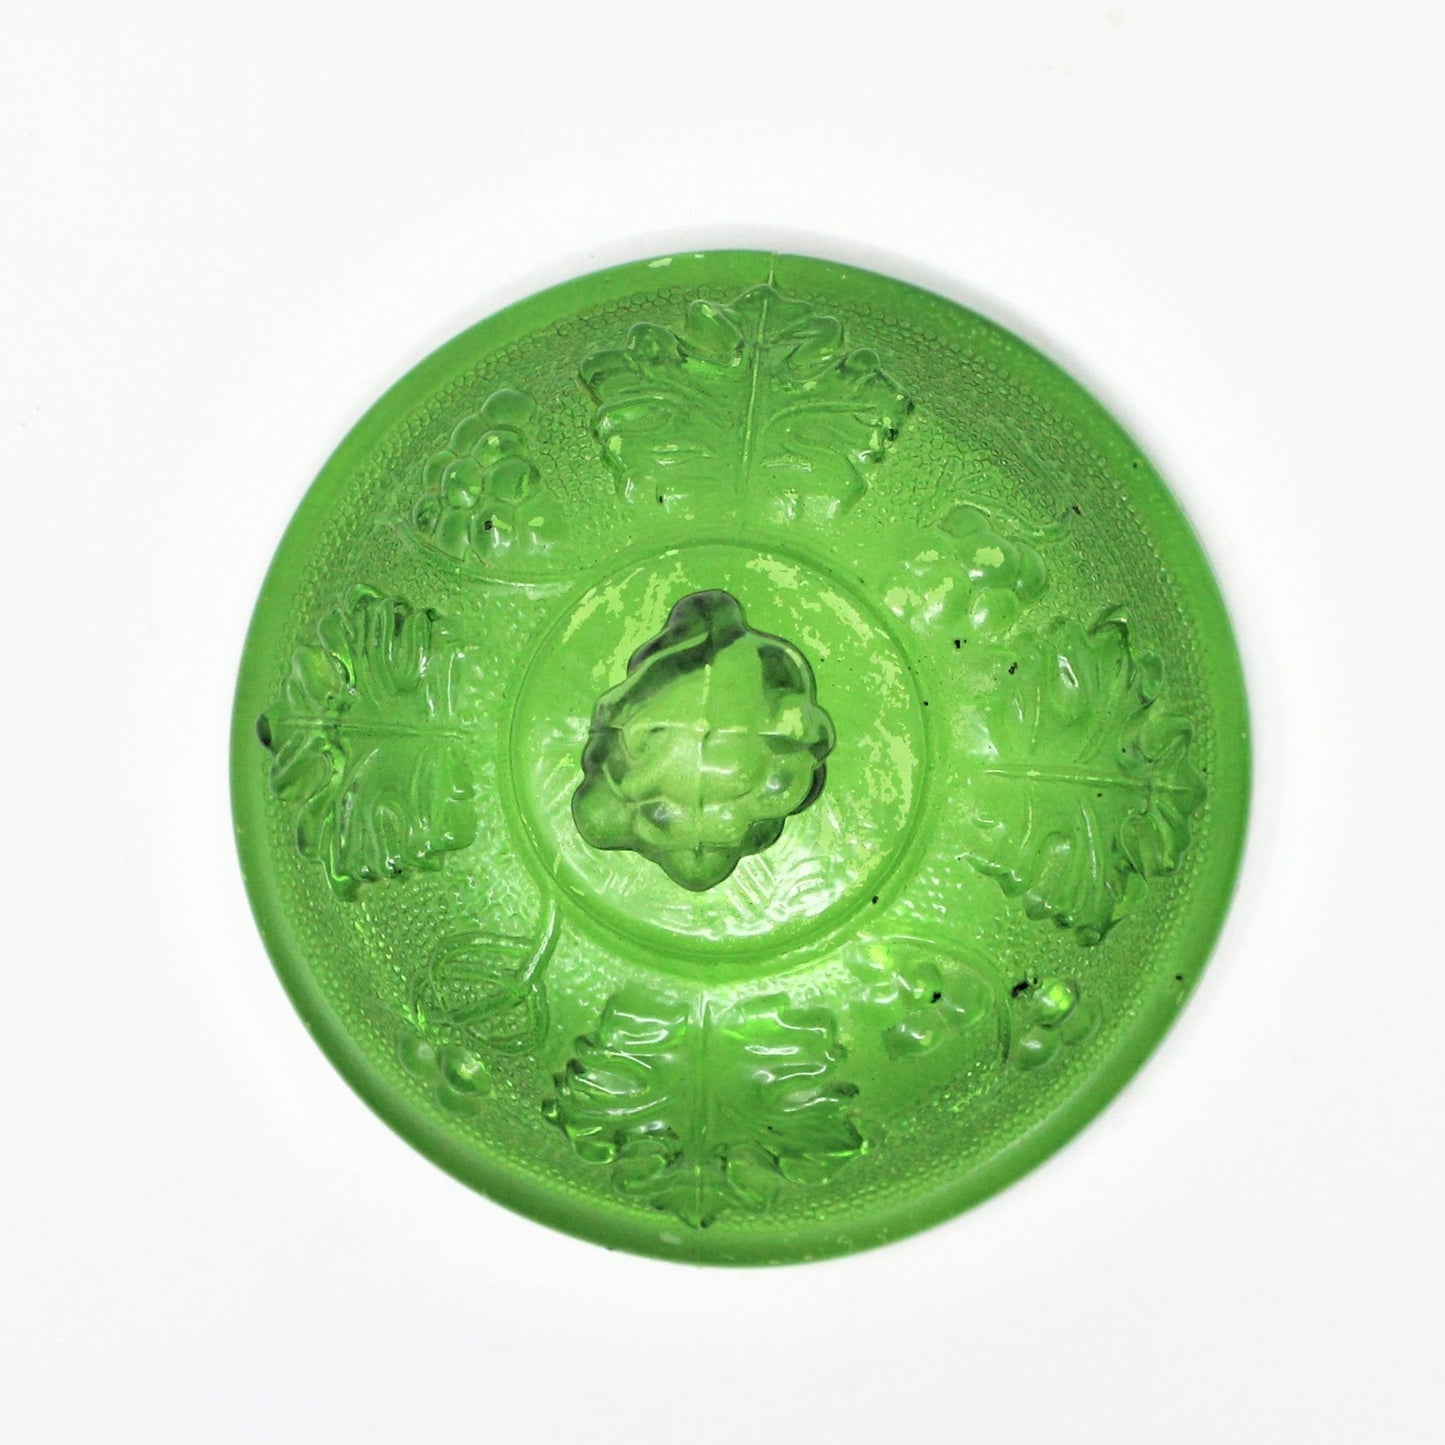 Candy Dish with Lid, Jeannette Glass, Grapes & Vines 3525, Green Footed Bowl, Vintage